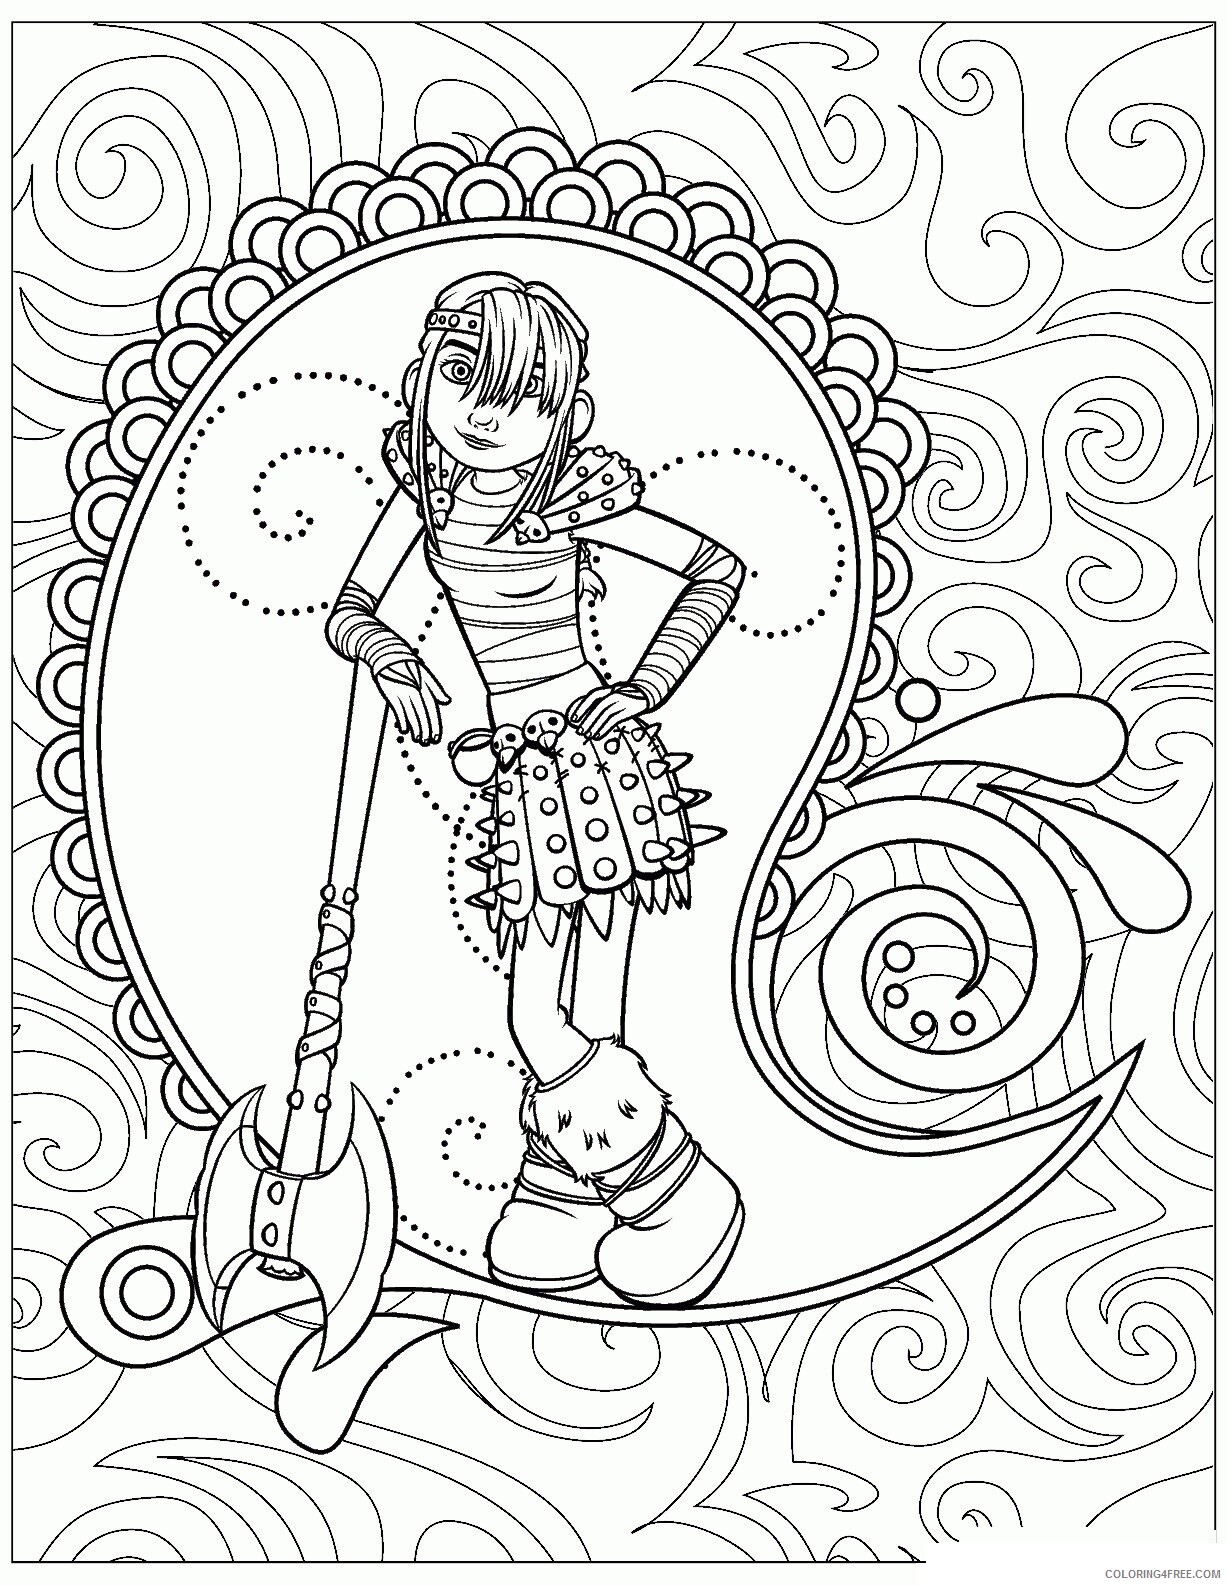 Astrid Coloring Pages Printable Sheets page Astrid jpg 2021 a 3410 Coloring4free